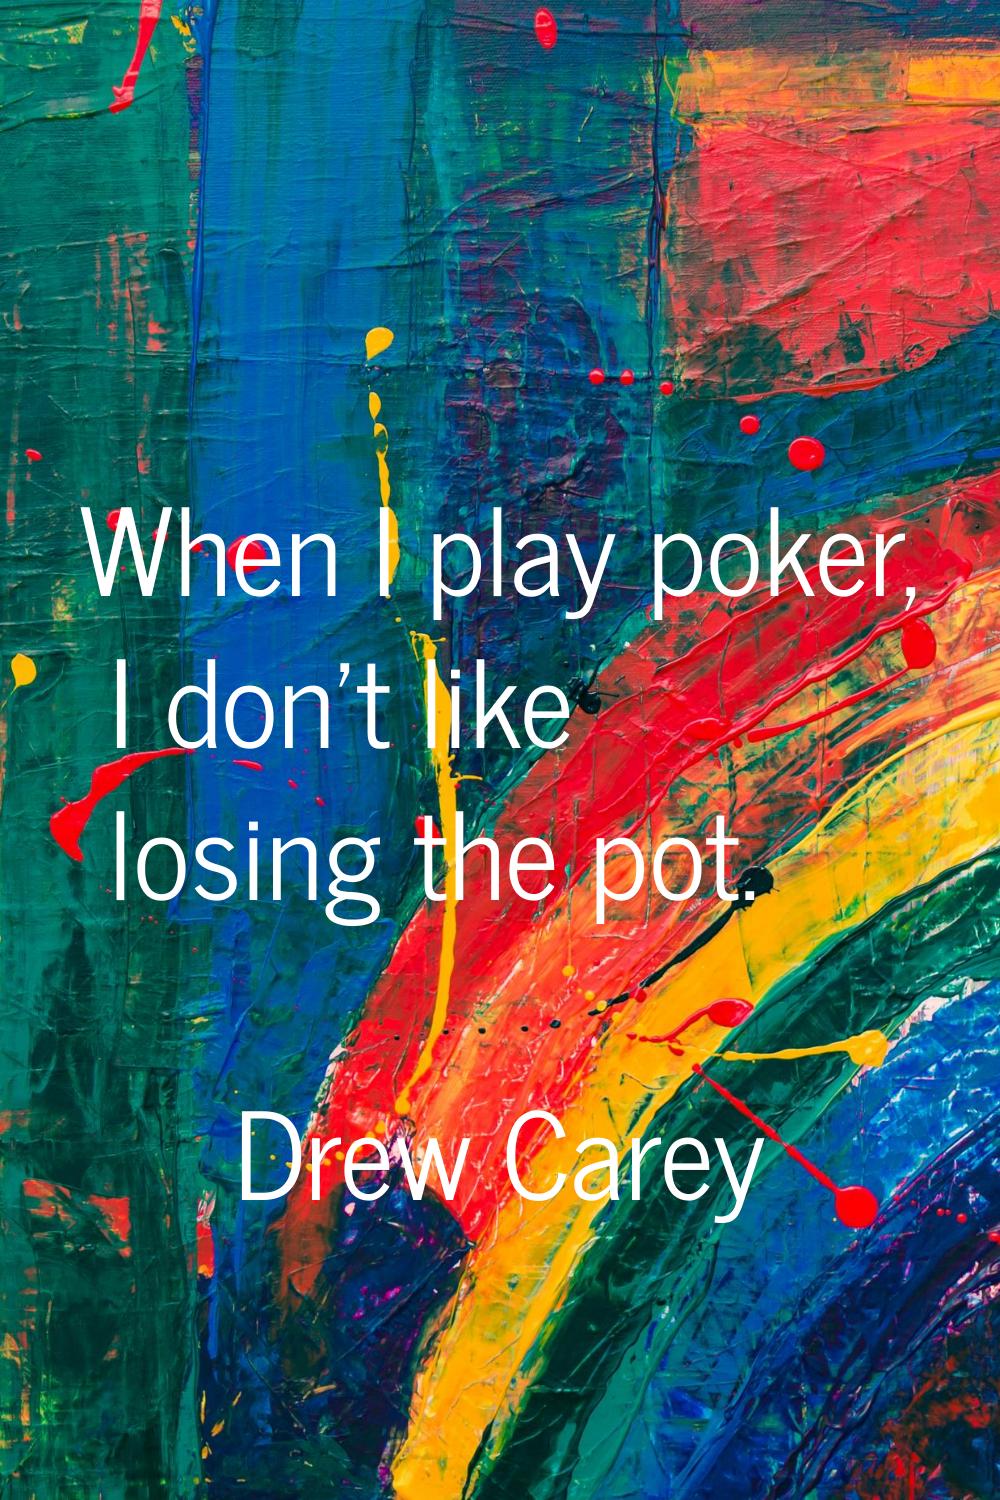 When I play poker, I don't like losing the pot.